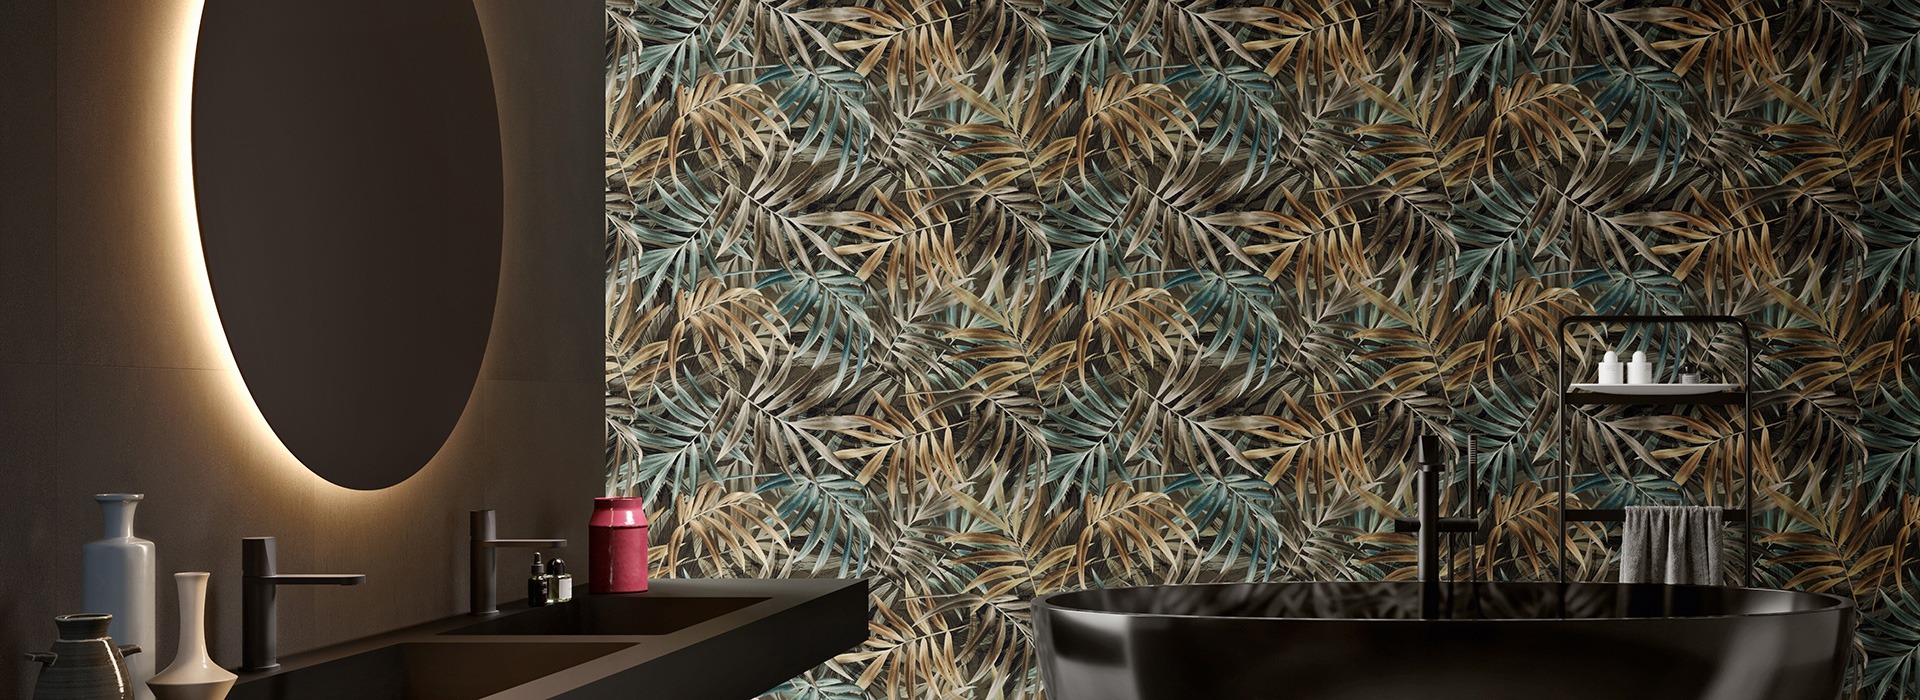 Italtile brings the Wallpaper Print Tile Trend to South Africa.